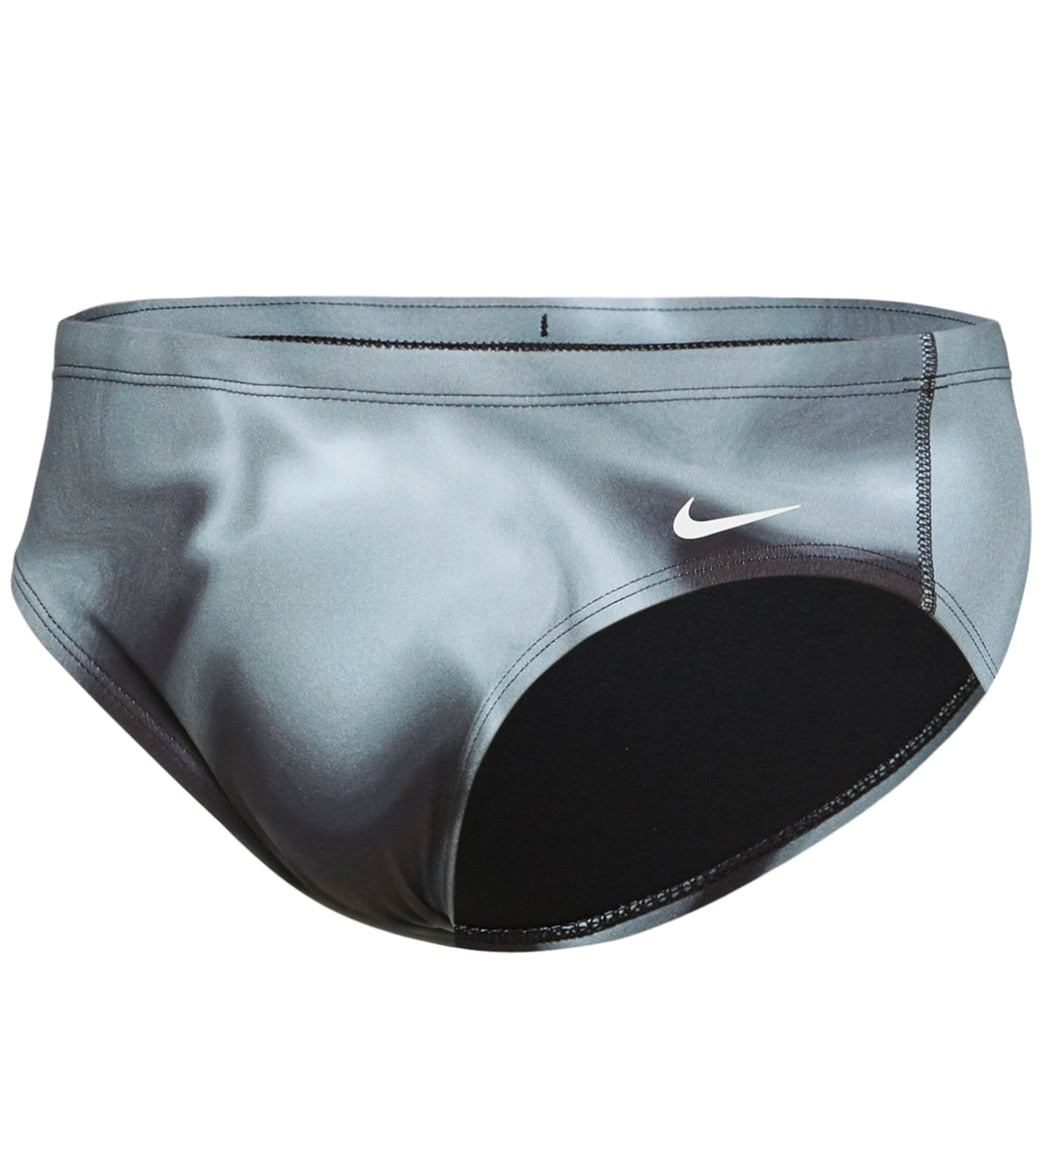 Nike Men's HydraStrong Amp Axis Brief Swimsuit at SwimOutlet.com